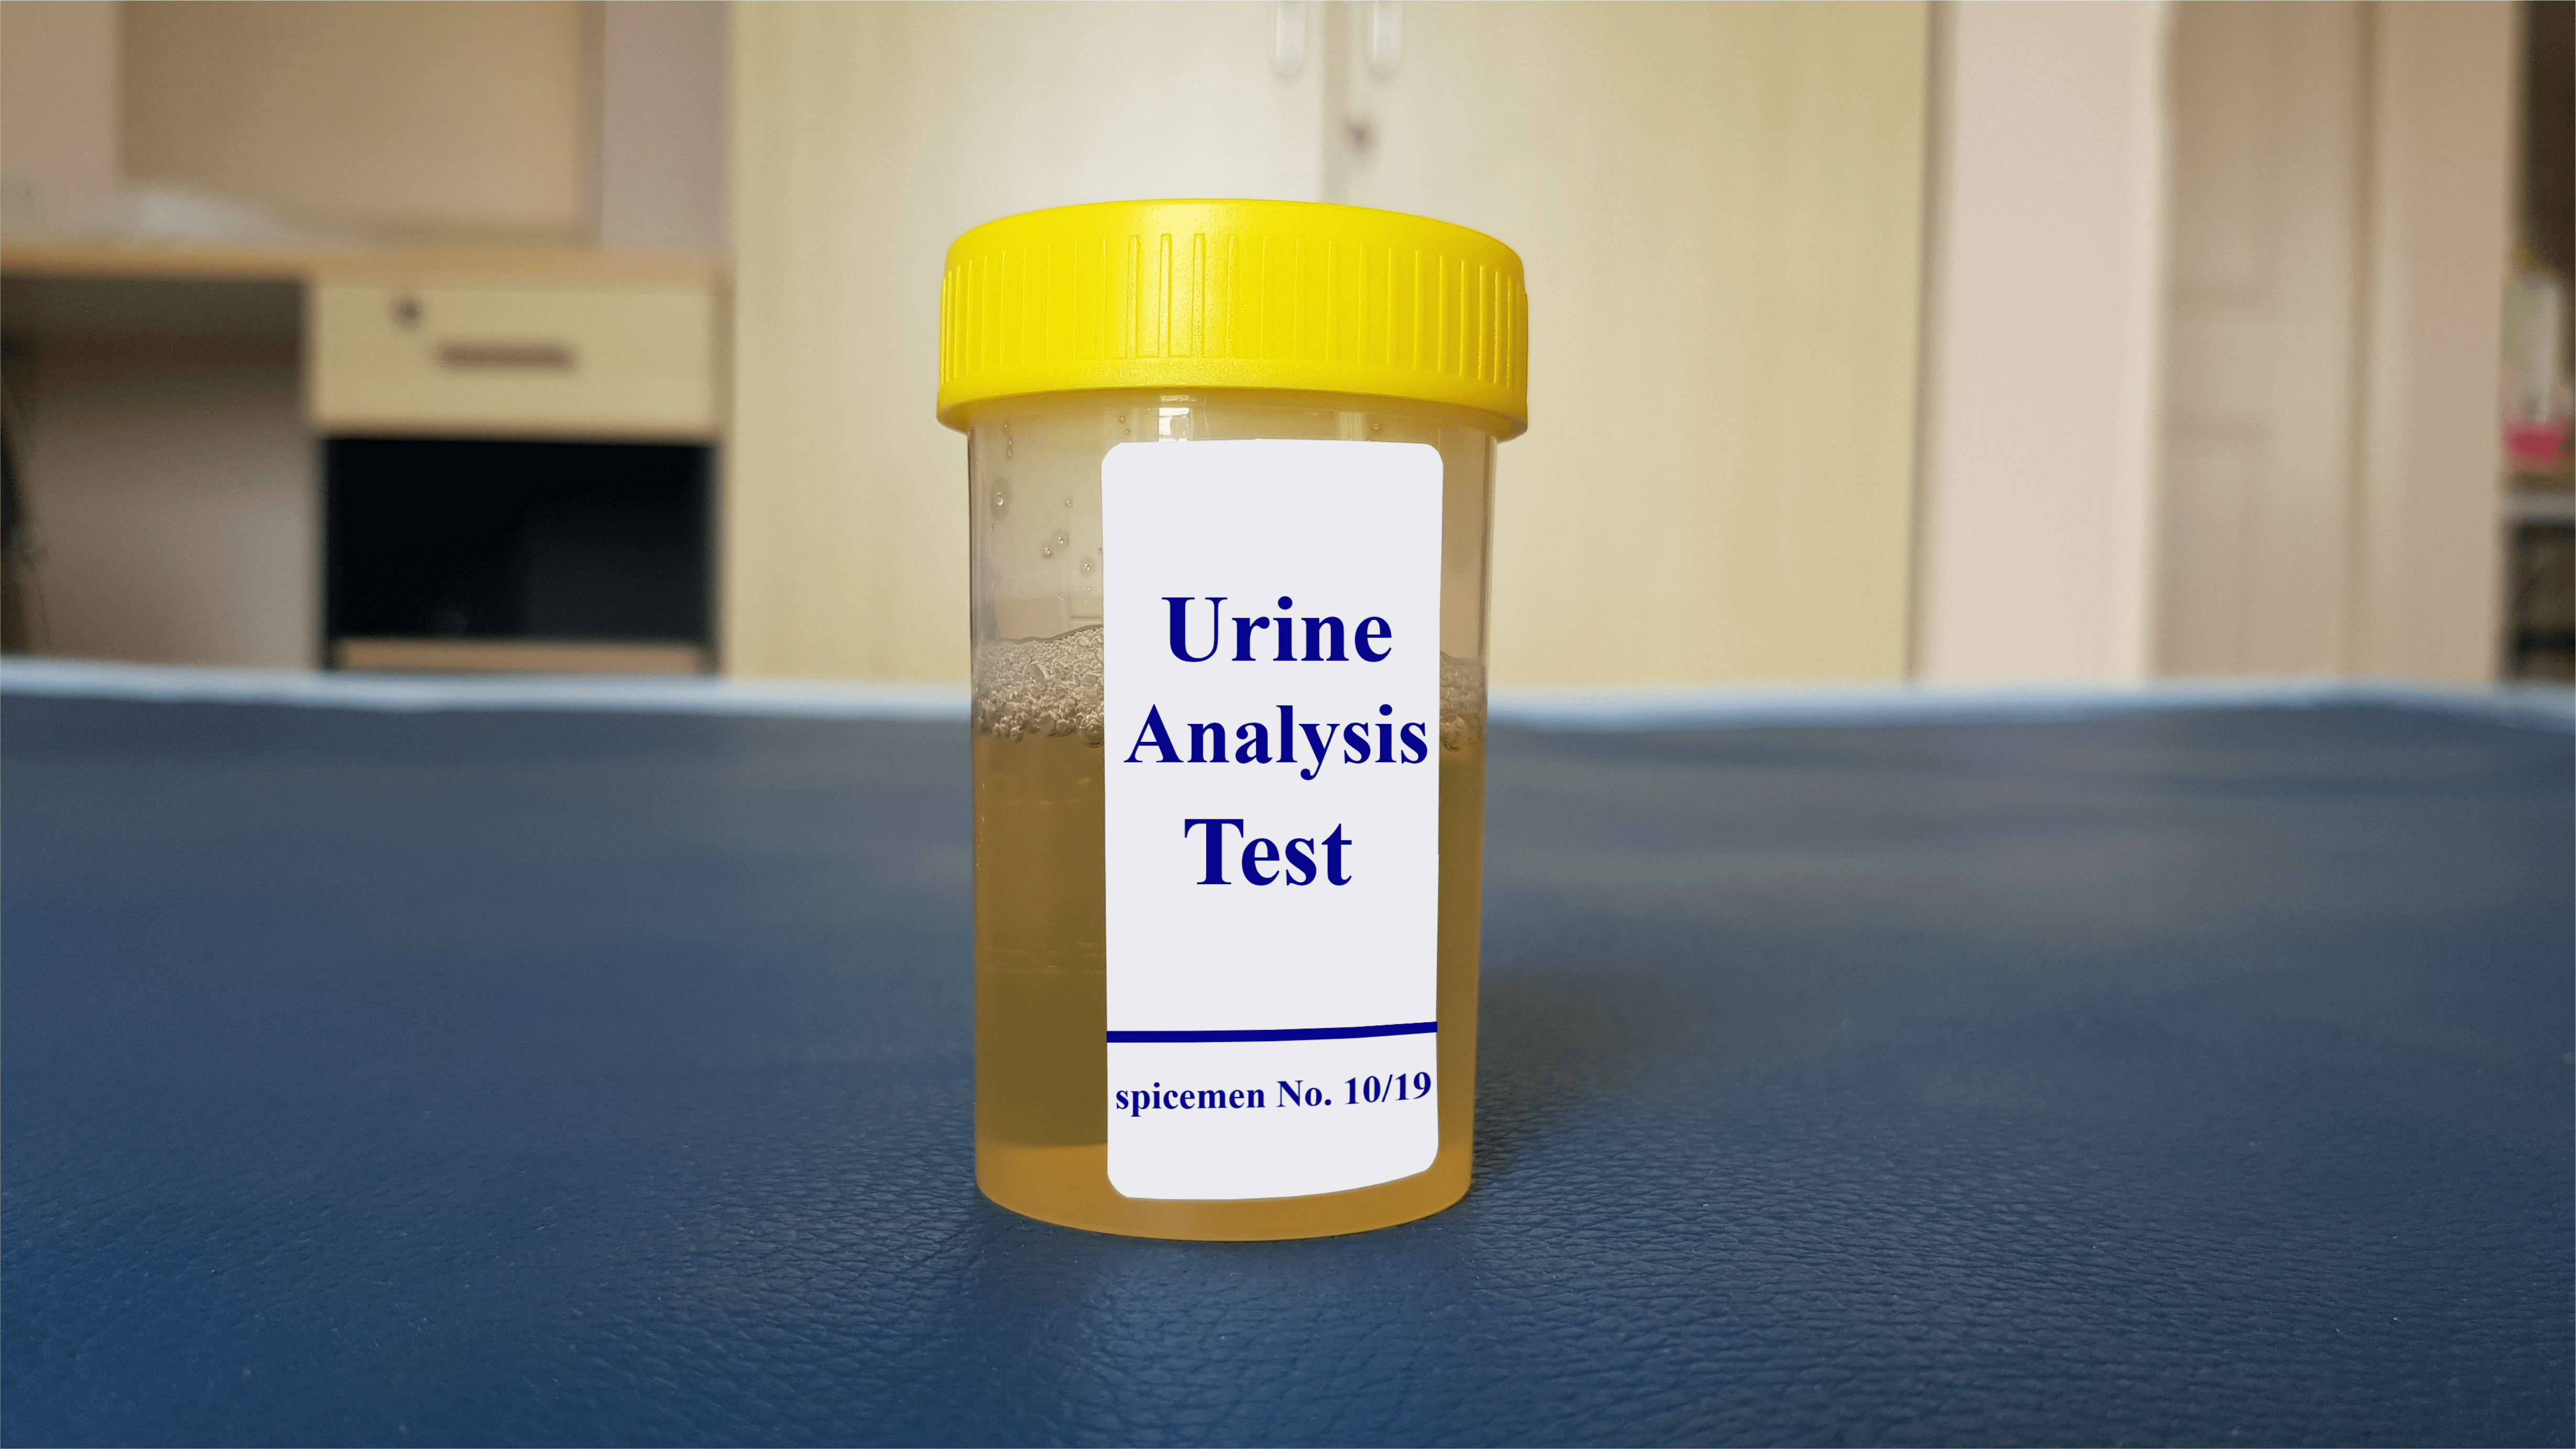 Spotting Red Flags: Abnormal Findings in Urine FEME